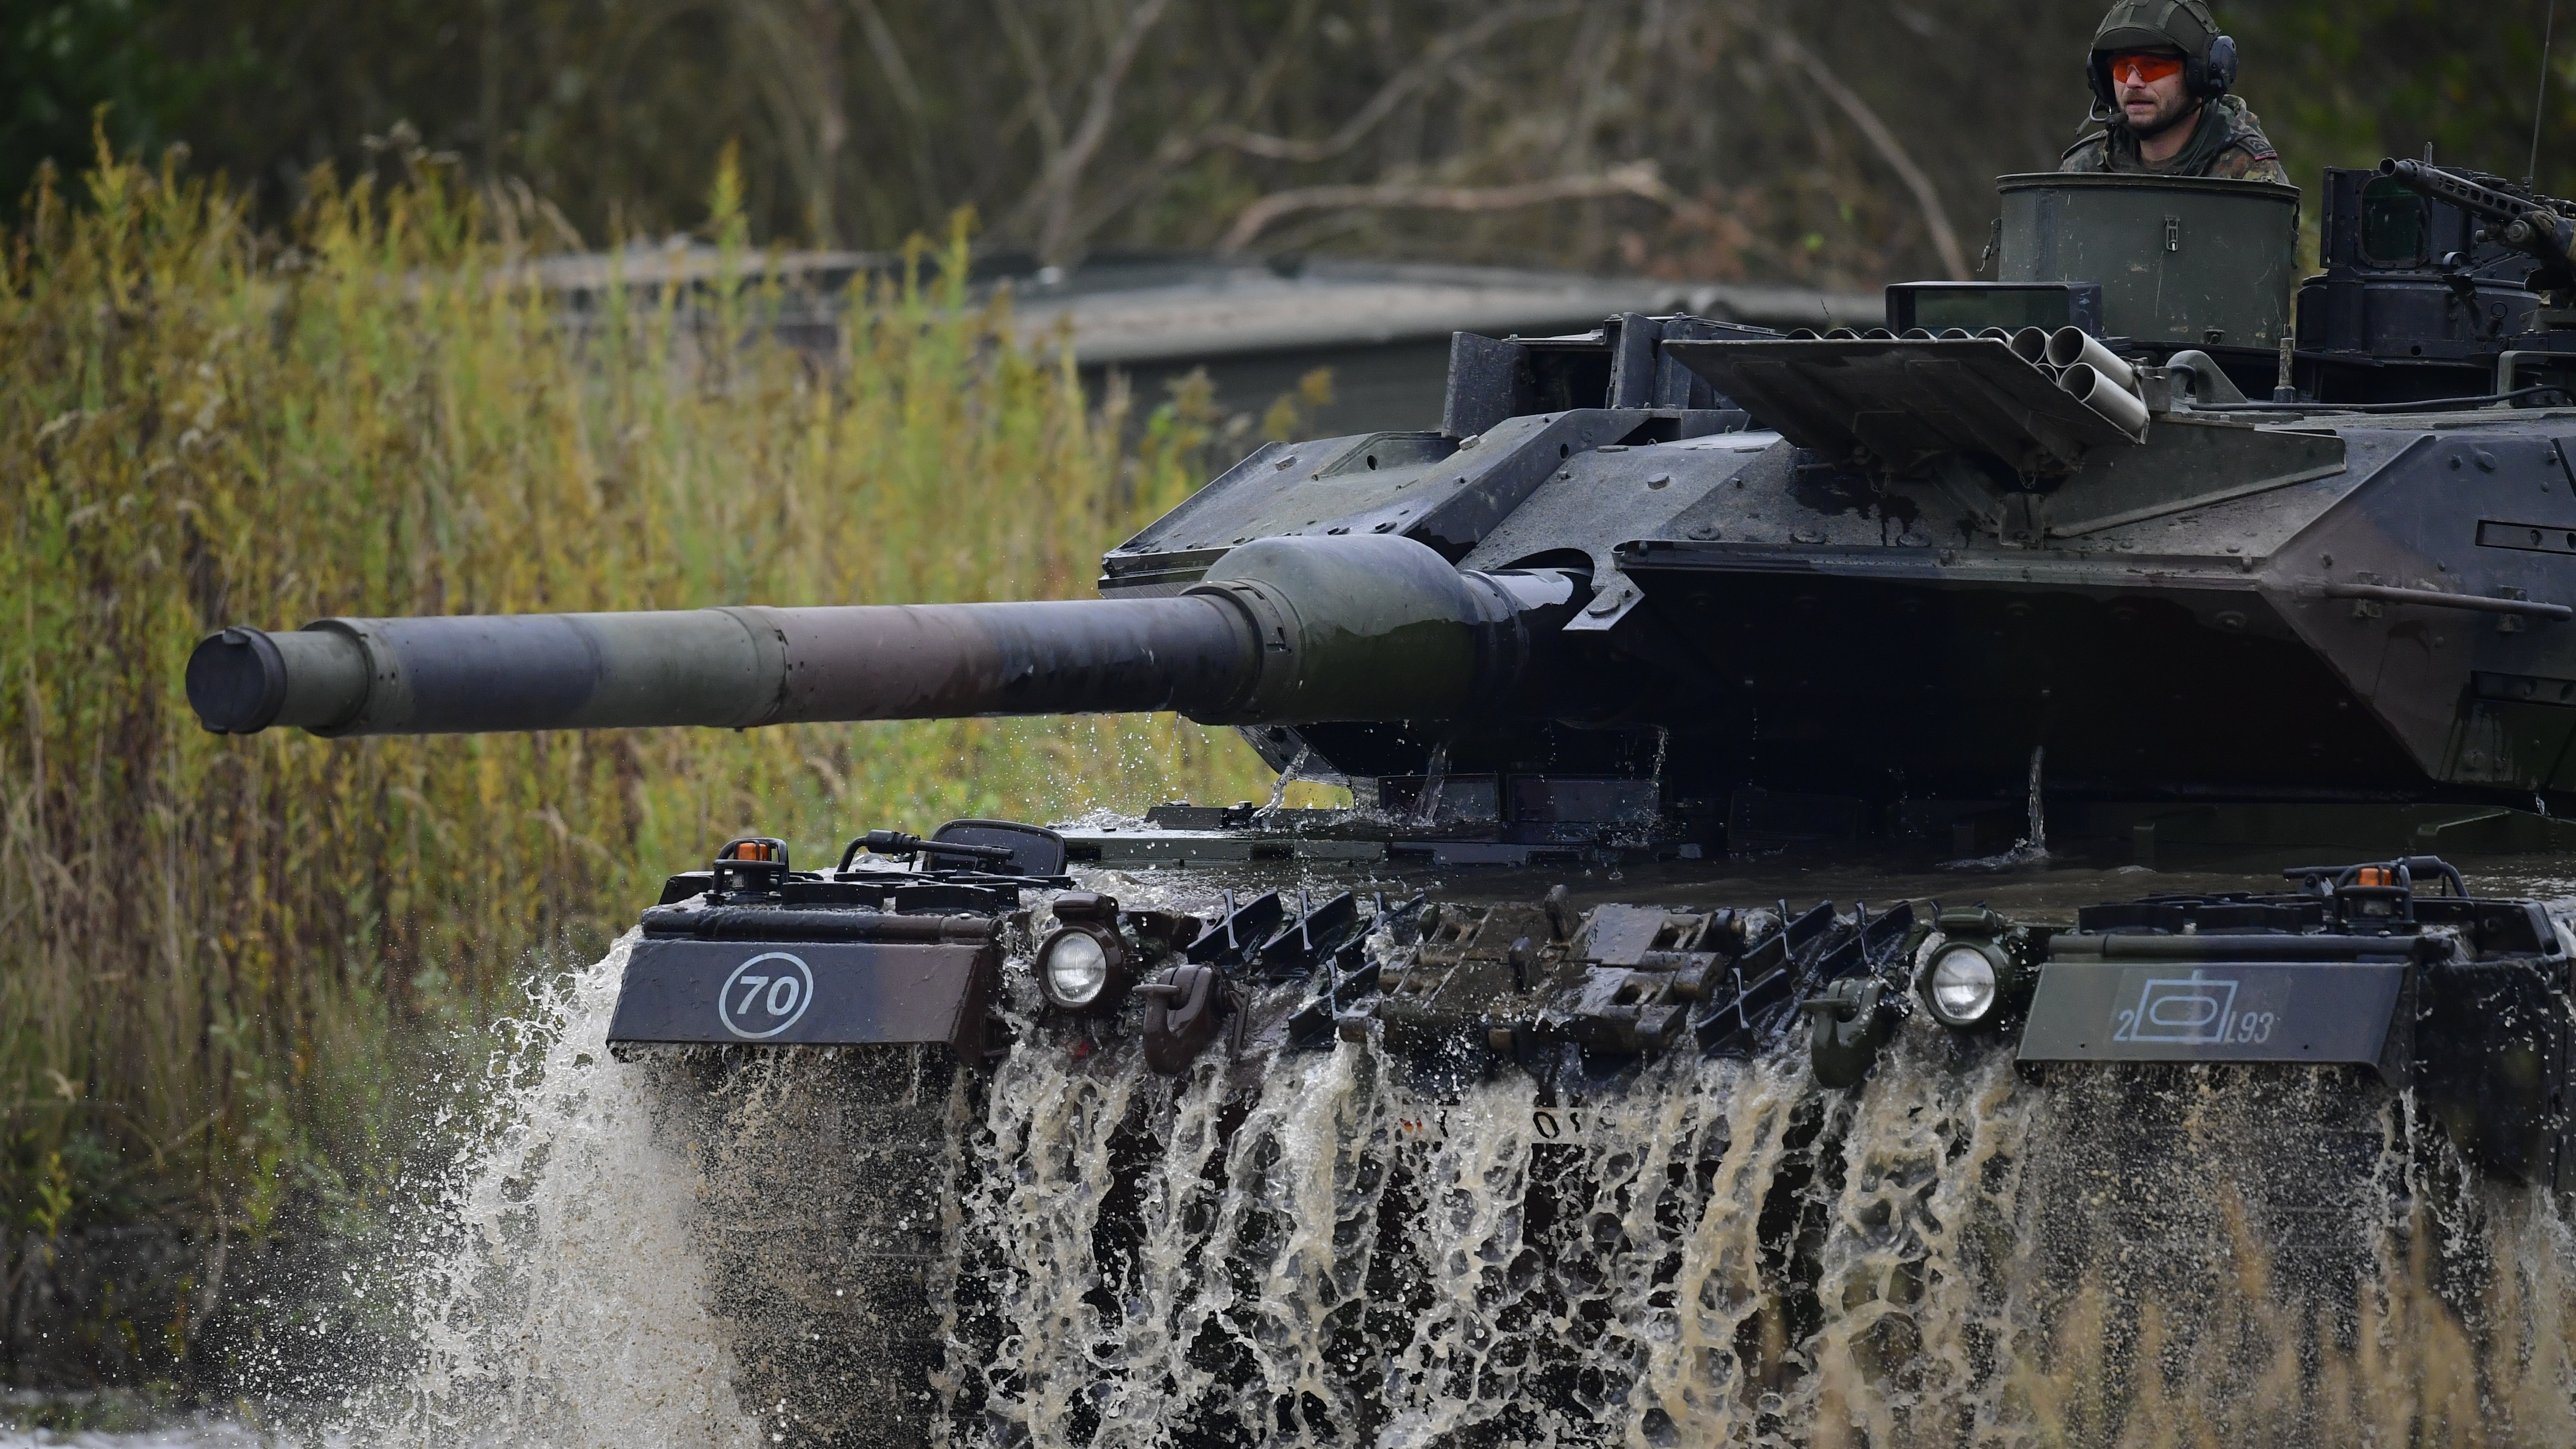 Singapore denies acquisition of new Leopard tank variant